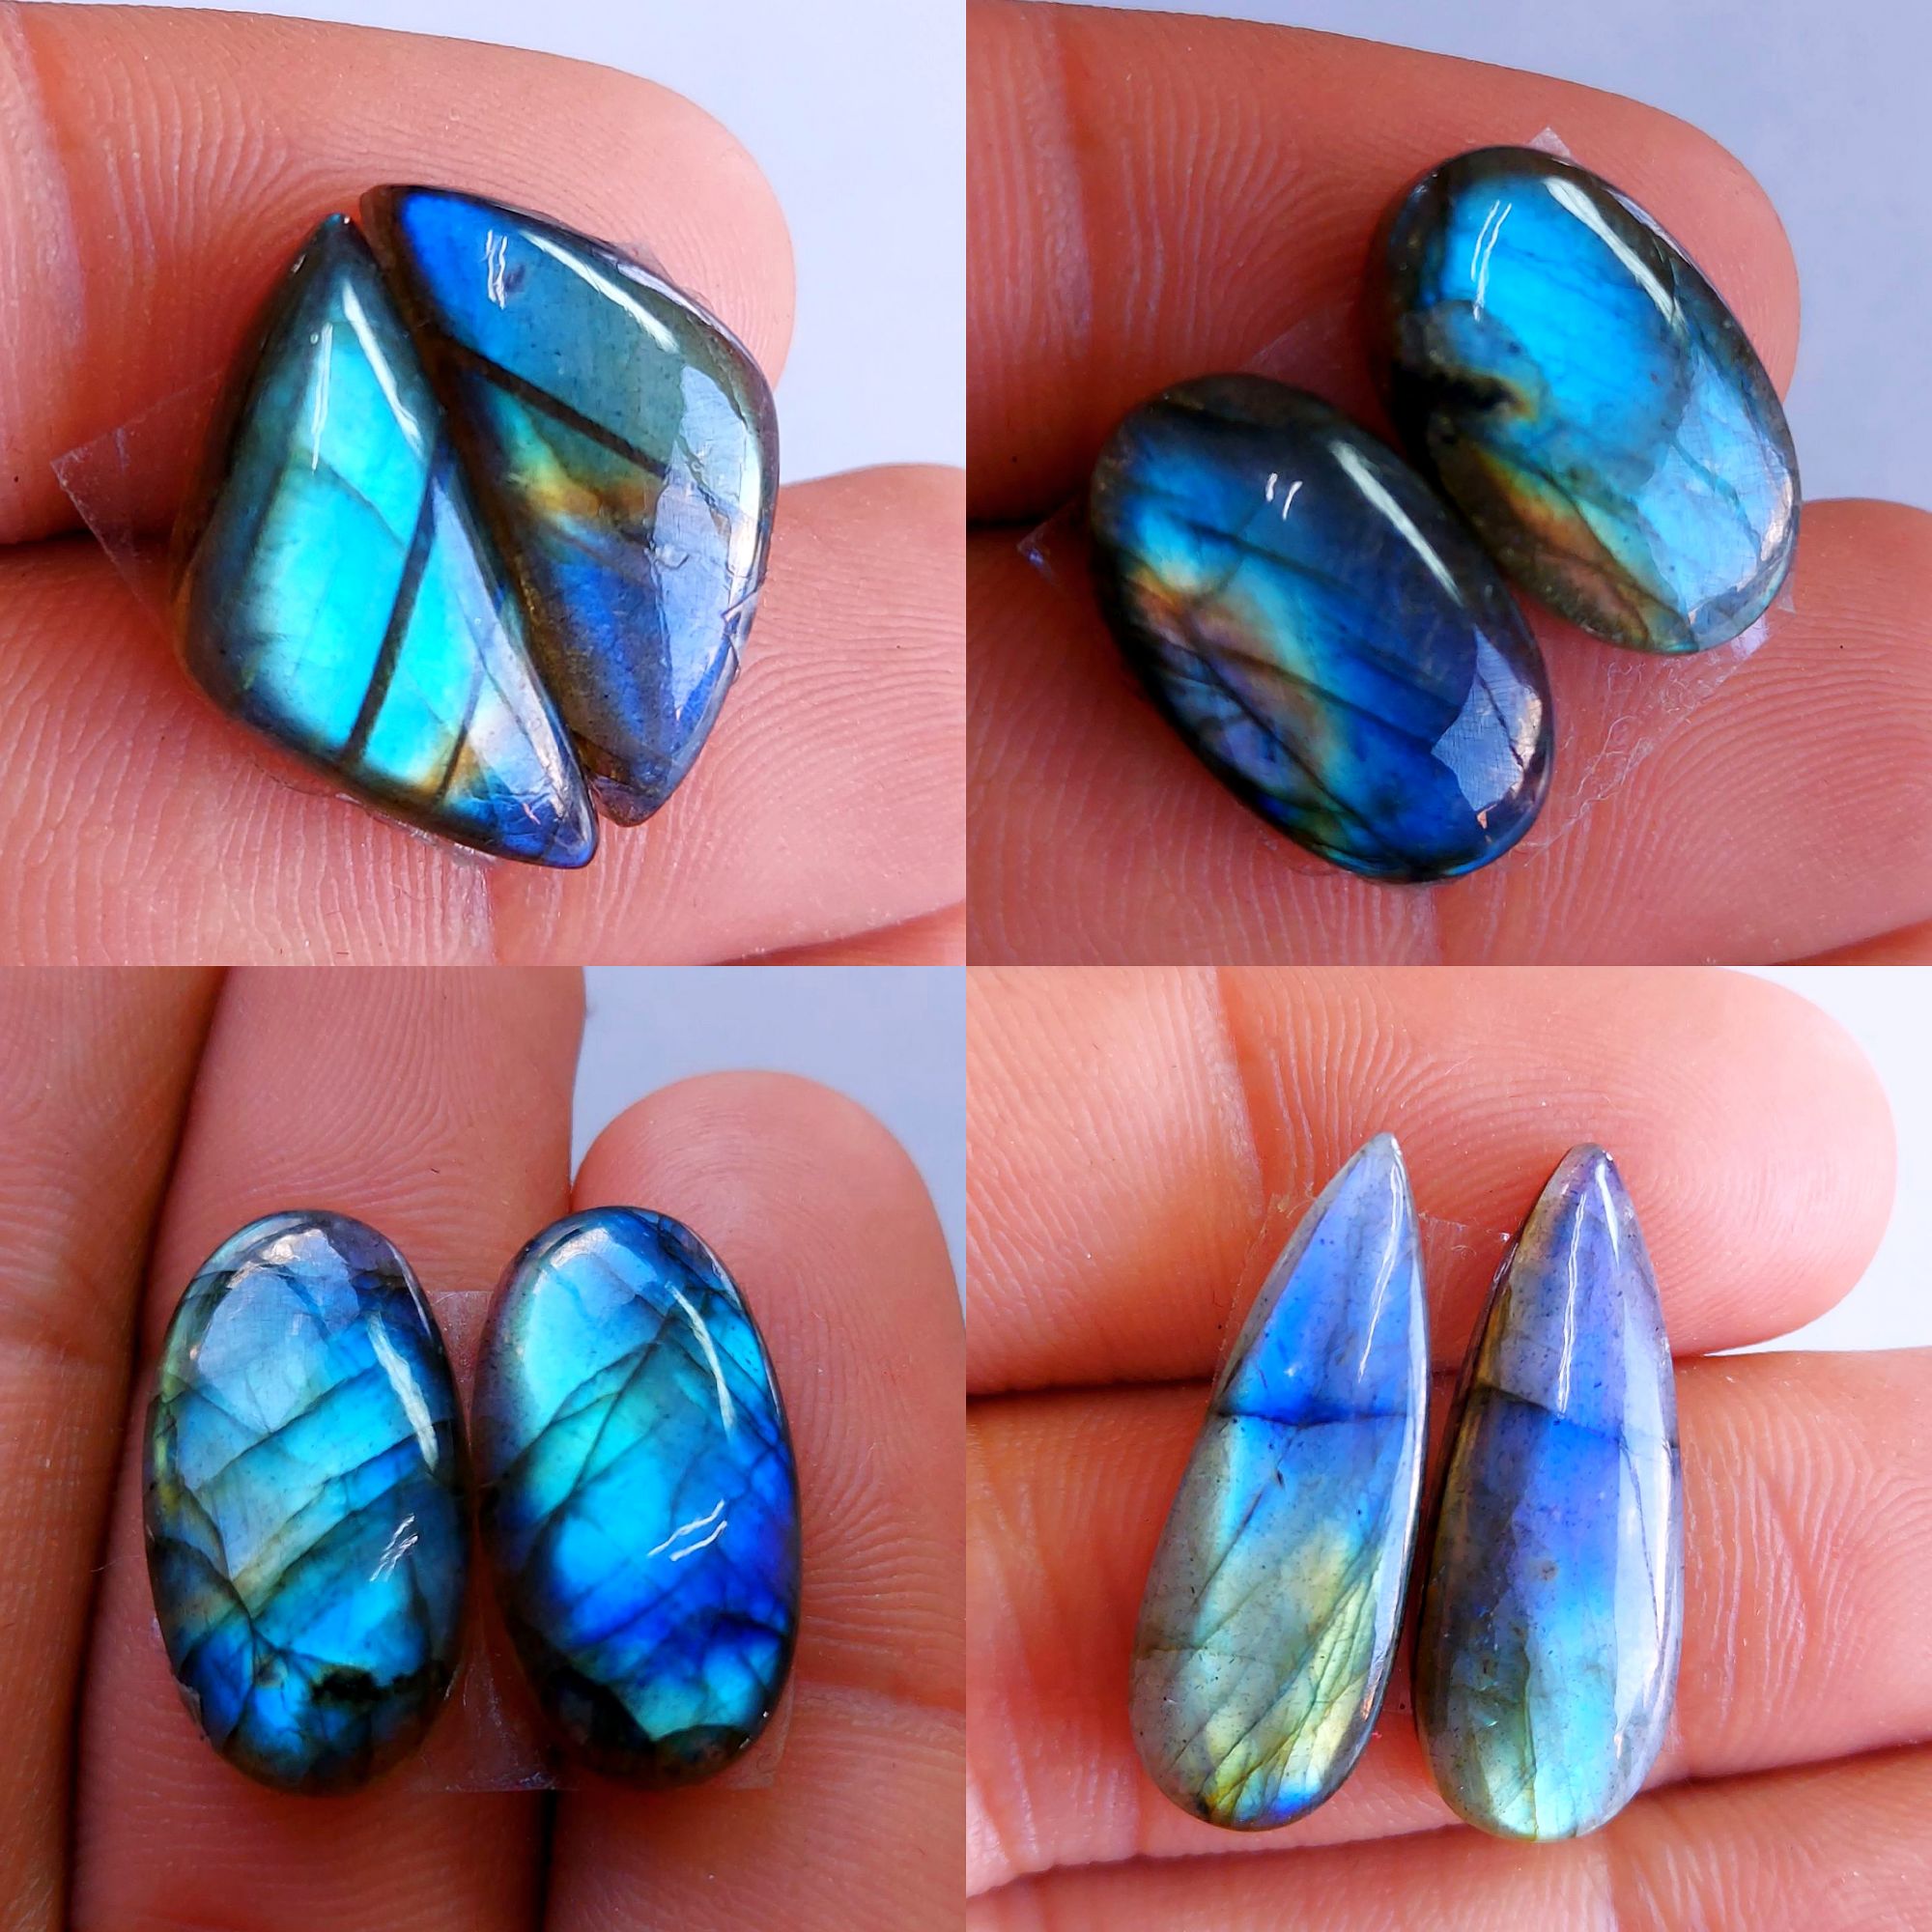 4 Pairs lot 77Cts Natural Labradorite cabochon pair lot for jewelry making loose gemstone lot mix shape and size earring pairs 23x8 20x10mm